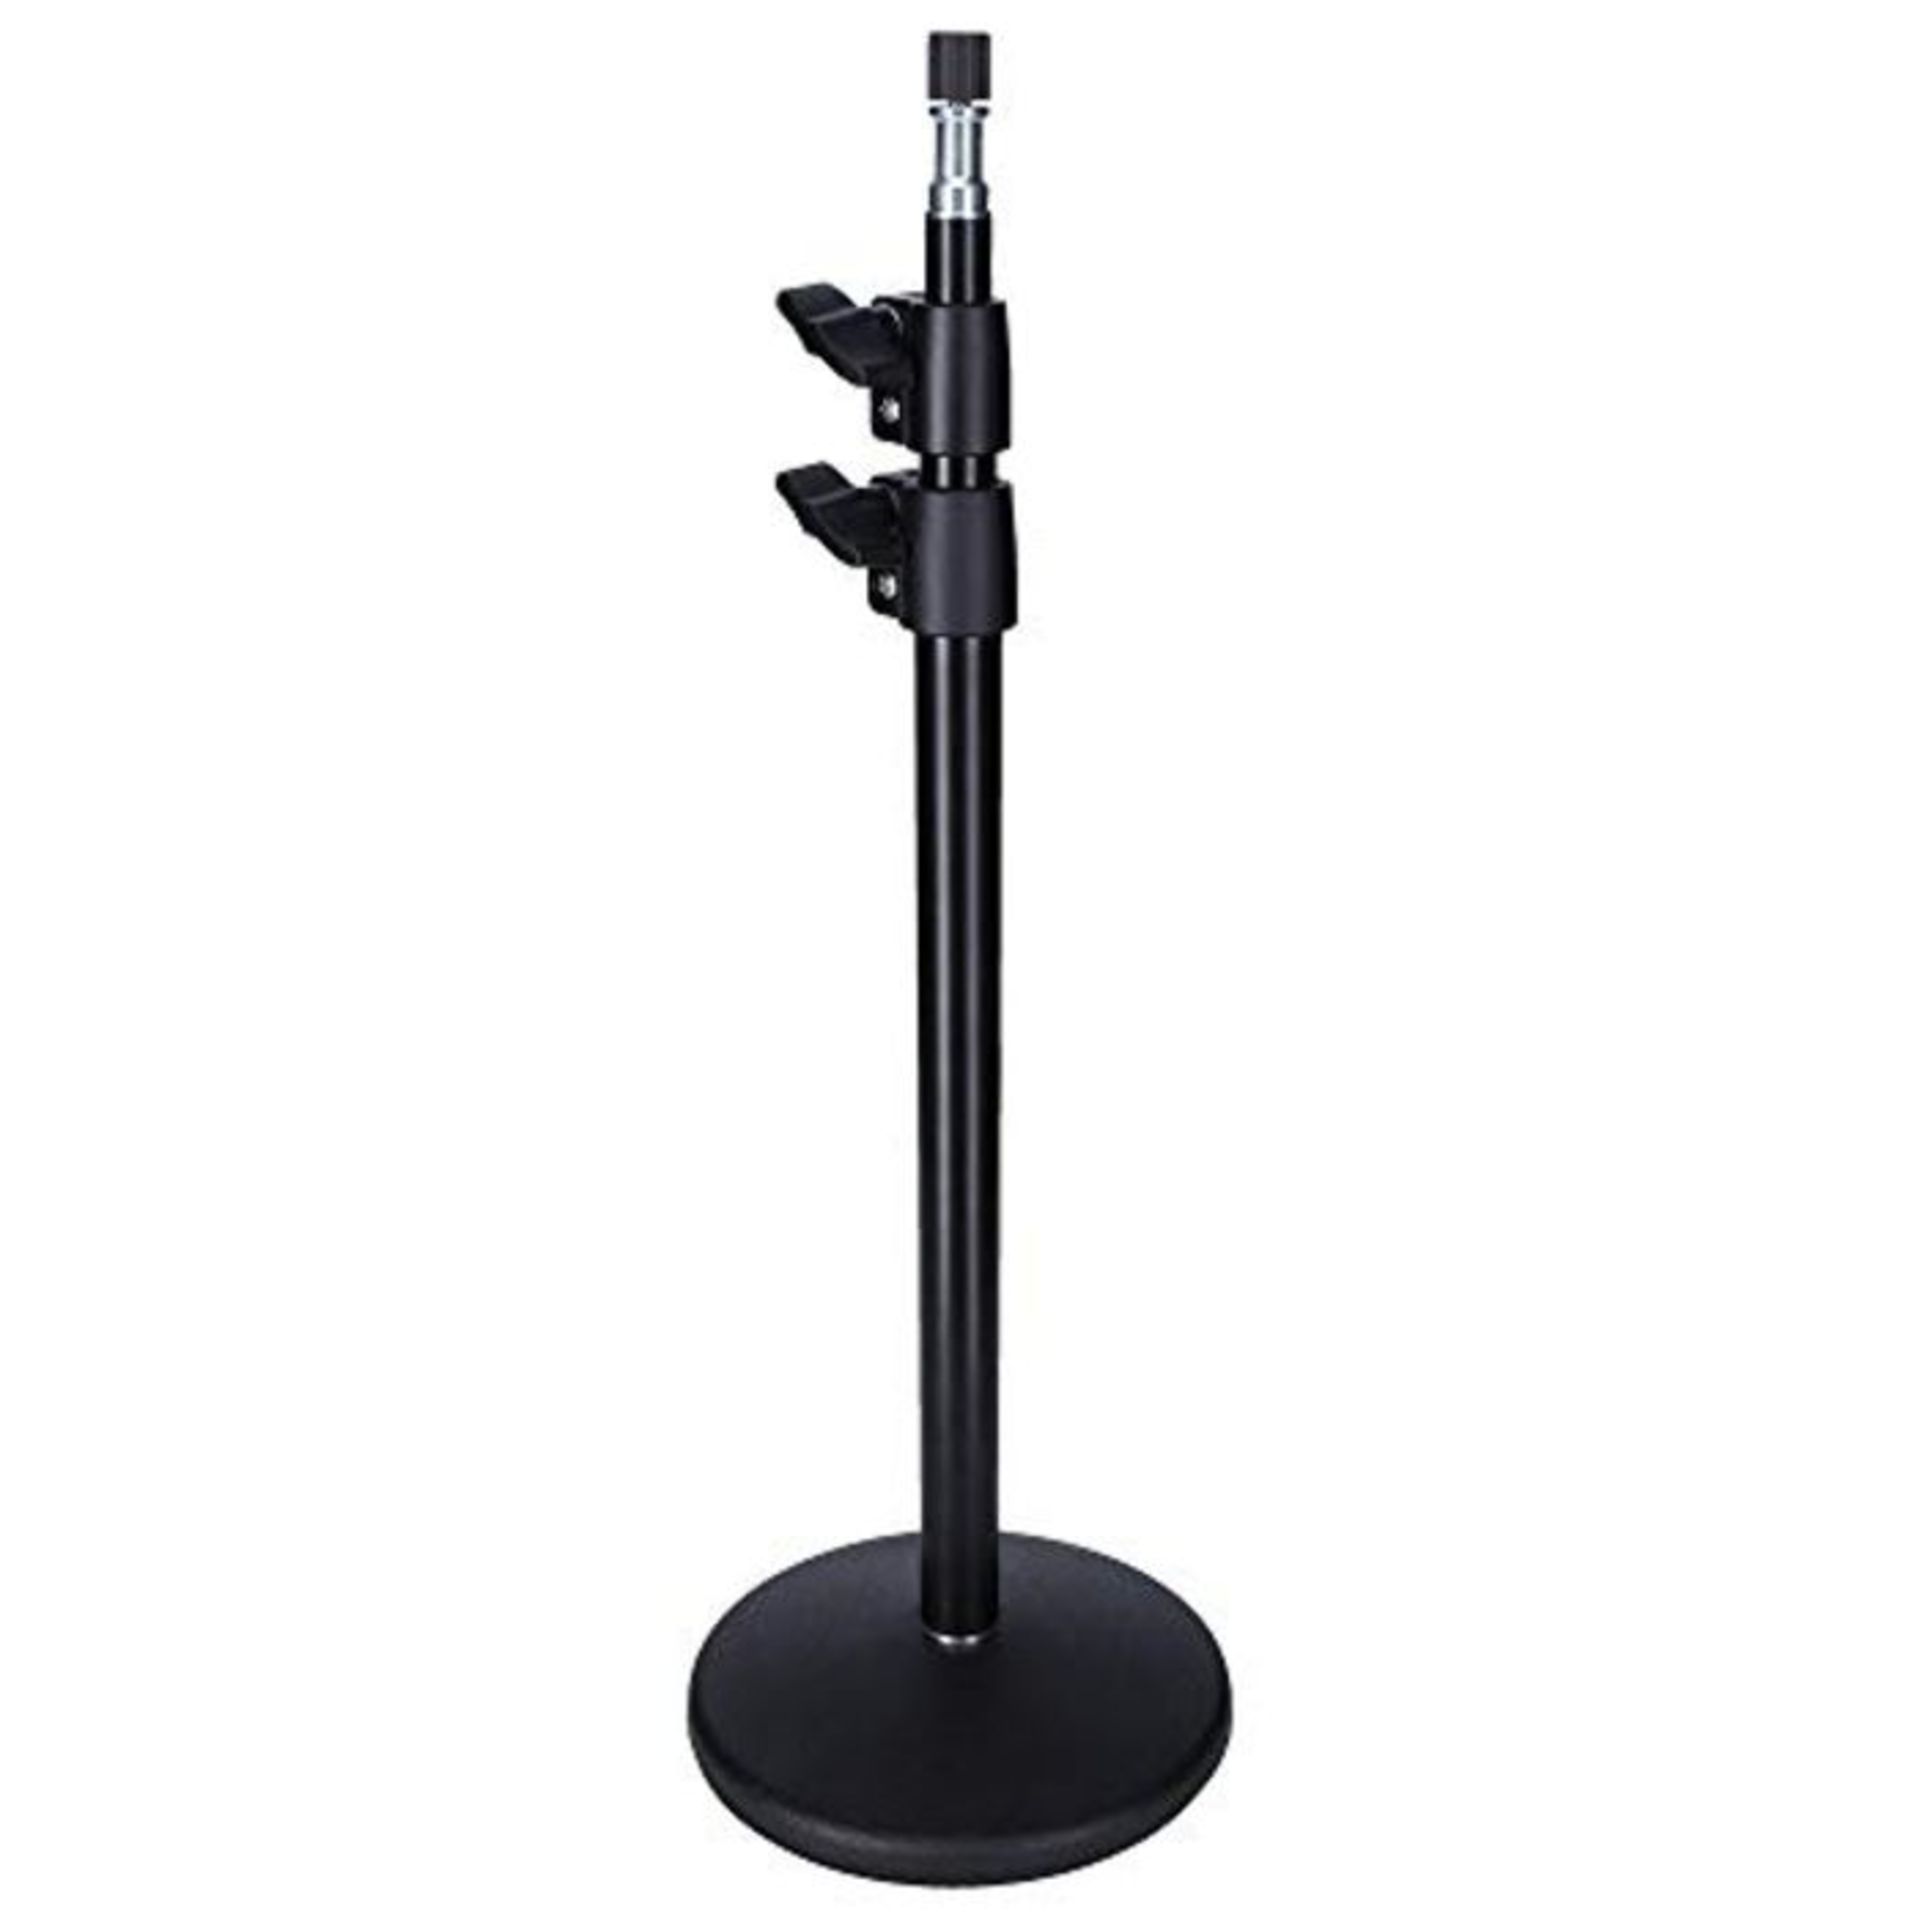 Rollei 28135 Tabletop Stand for Home Office with 1/4 Inch and Spigot Connection for Yo